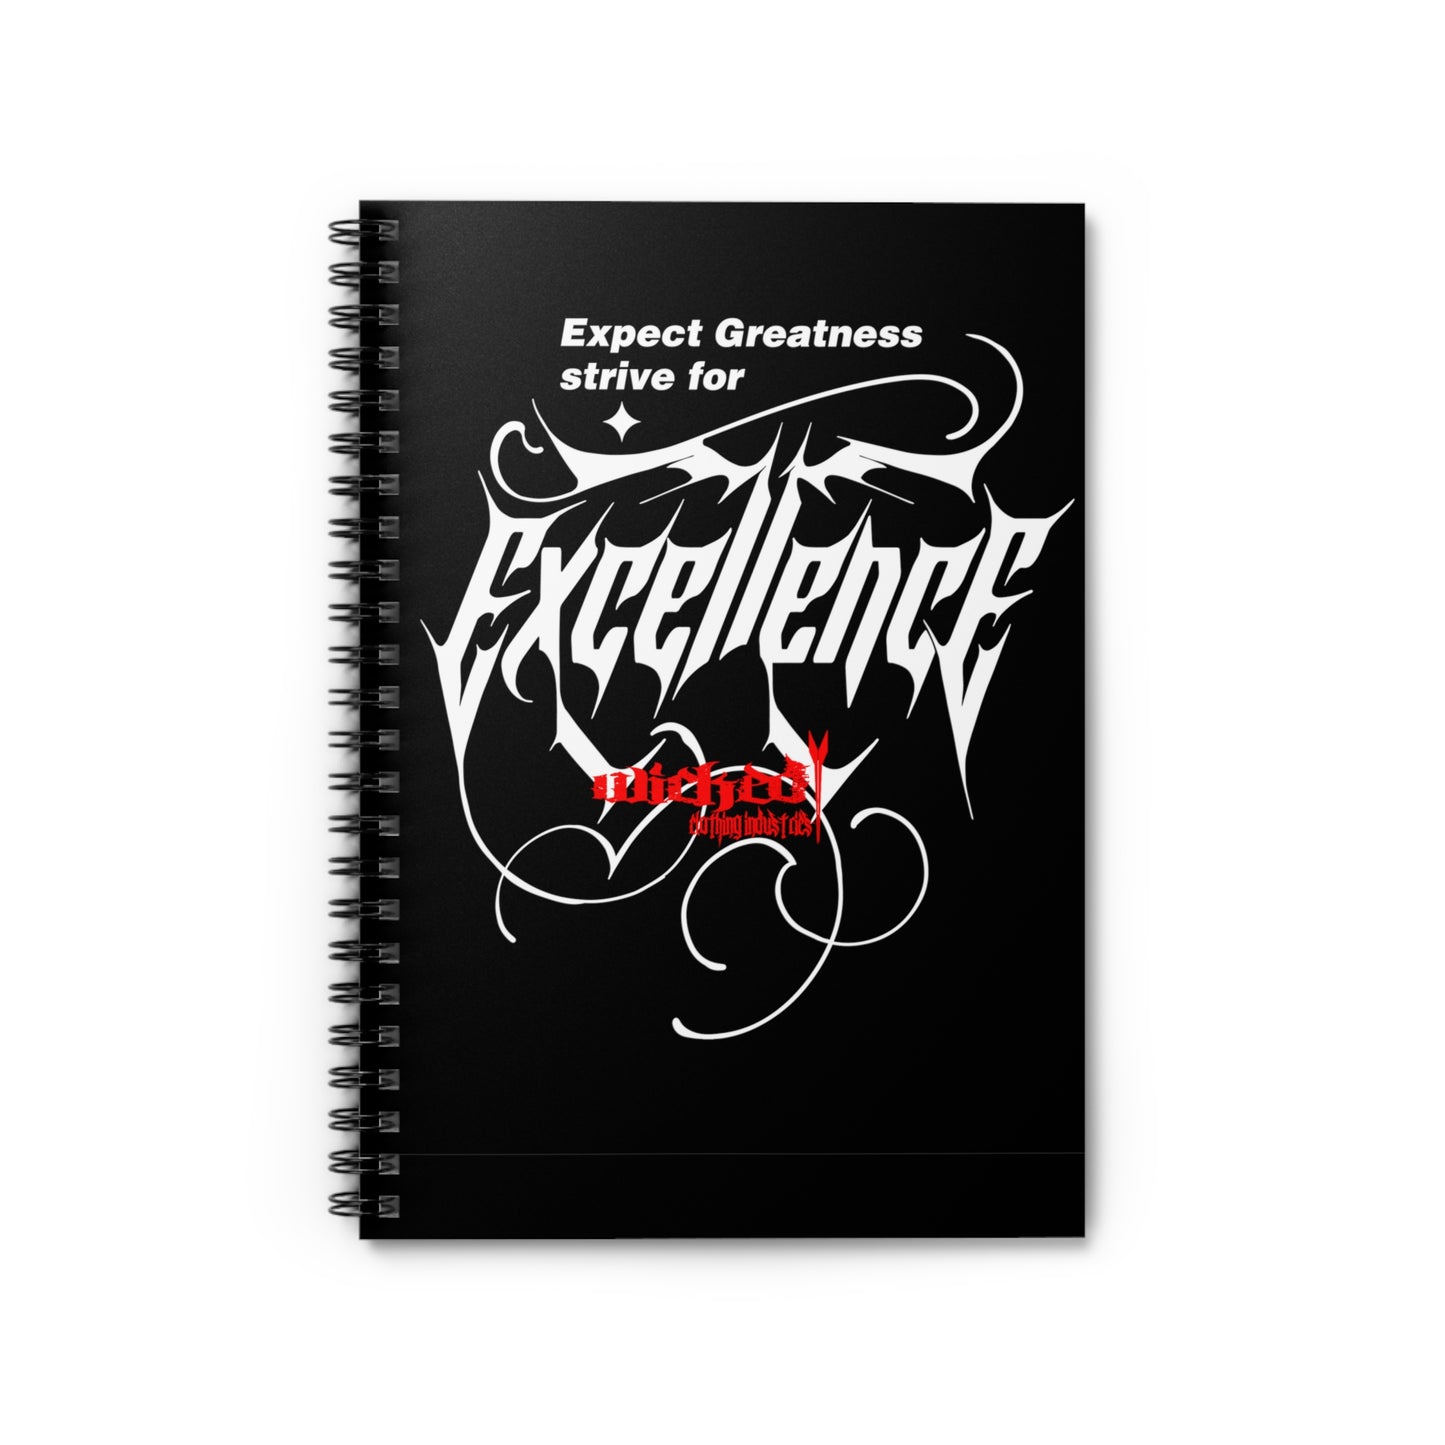 Expect Greatness- Ruled Line